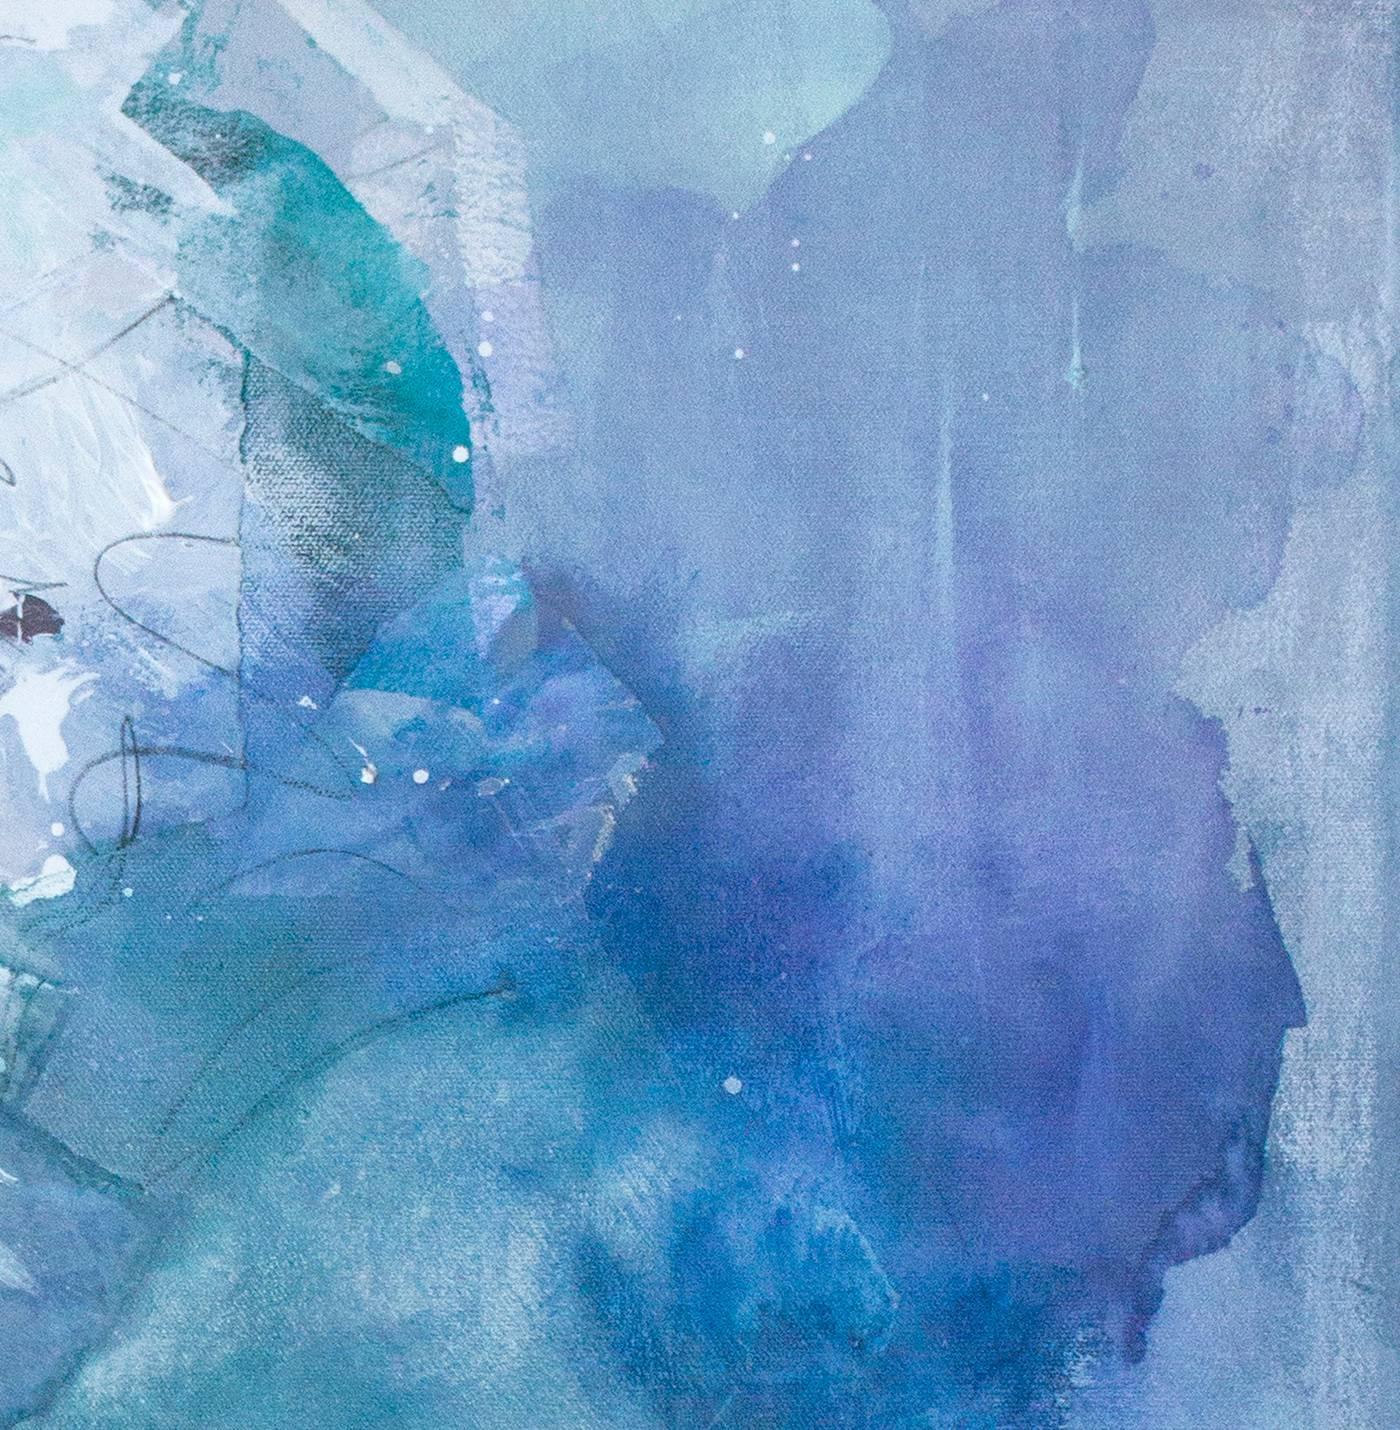 This cool-toned abstract painting by Julia Contacessi uses light layers to create a piece that has an aesthetic of water mixing and evaporating at the same time. The soft washes are complemented by harsher strokes, with violet, grey, teal, muted